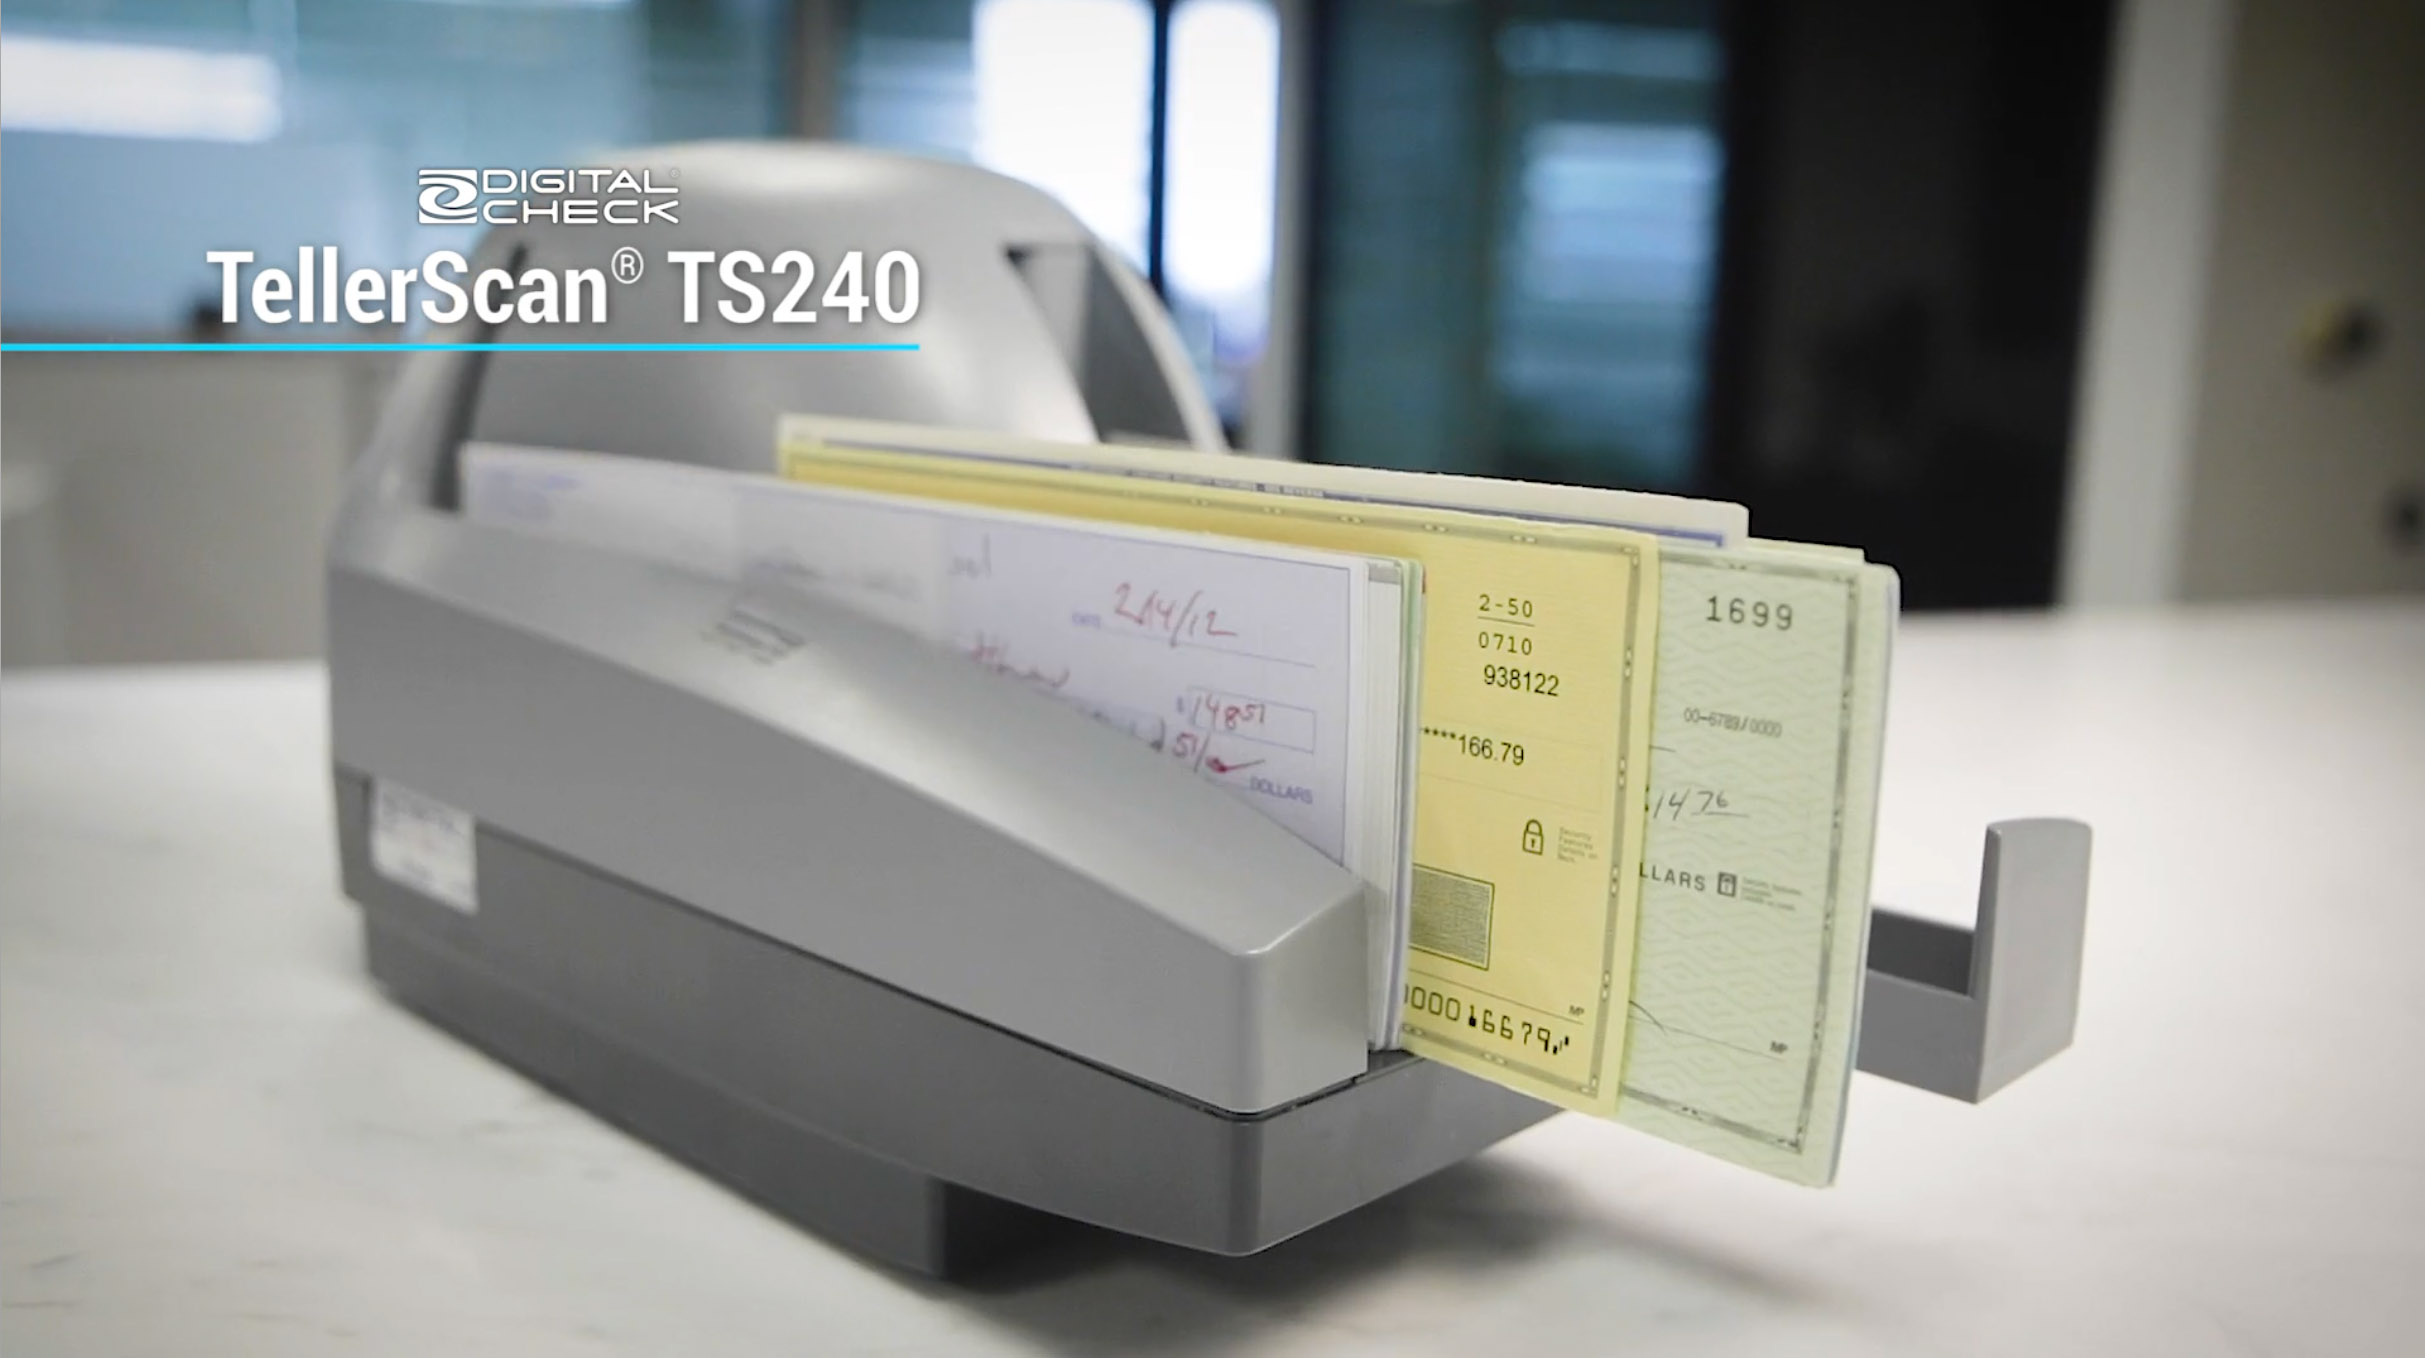 Adjusting the Paper Size on Your ReceiptNOW Thermal Printer - Support Tips  - Digital Check Corp.